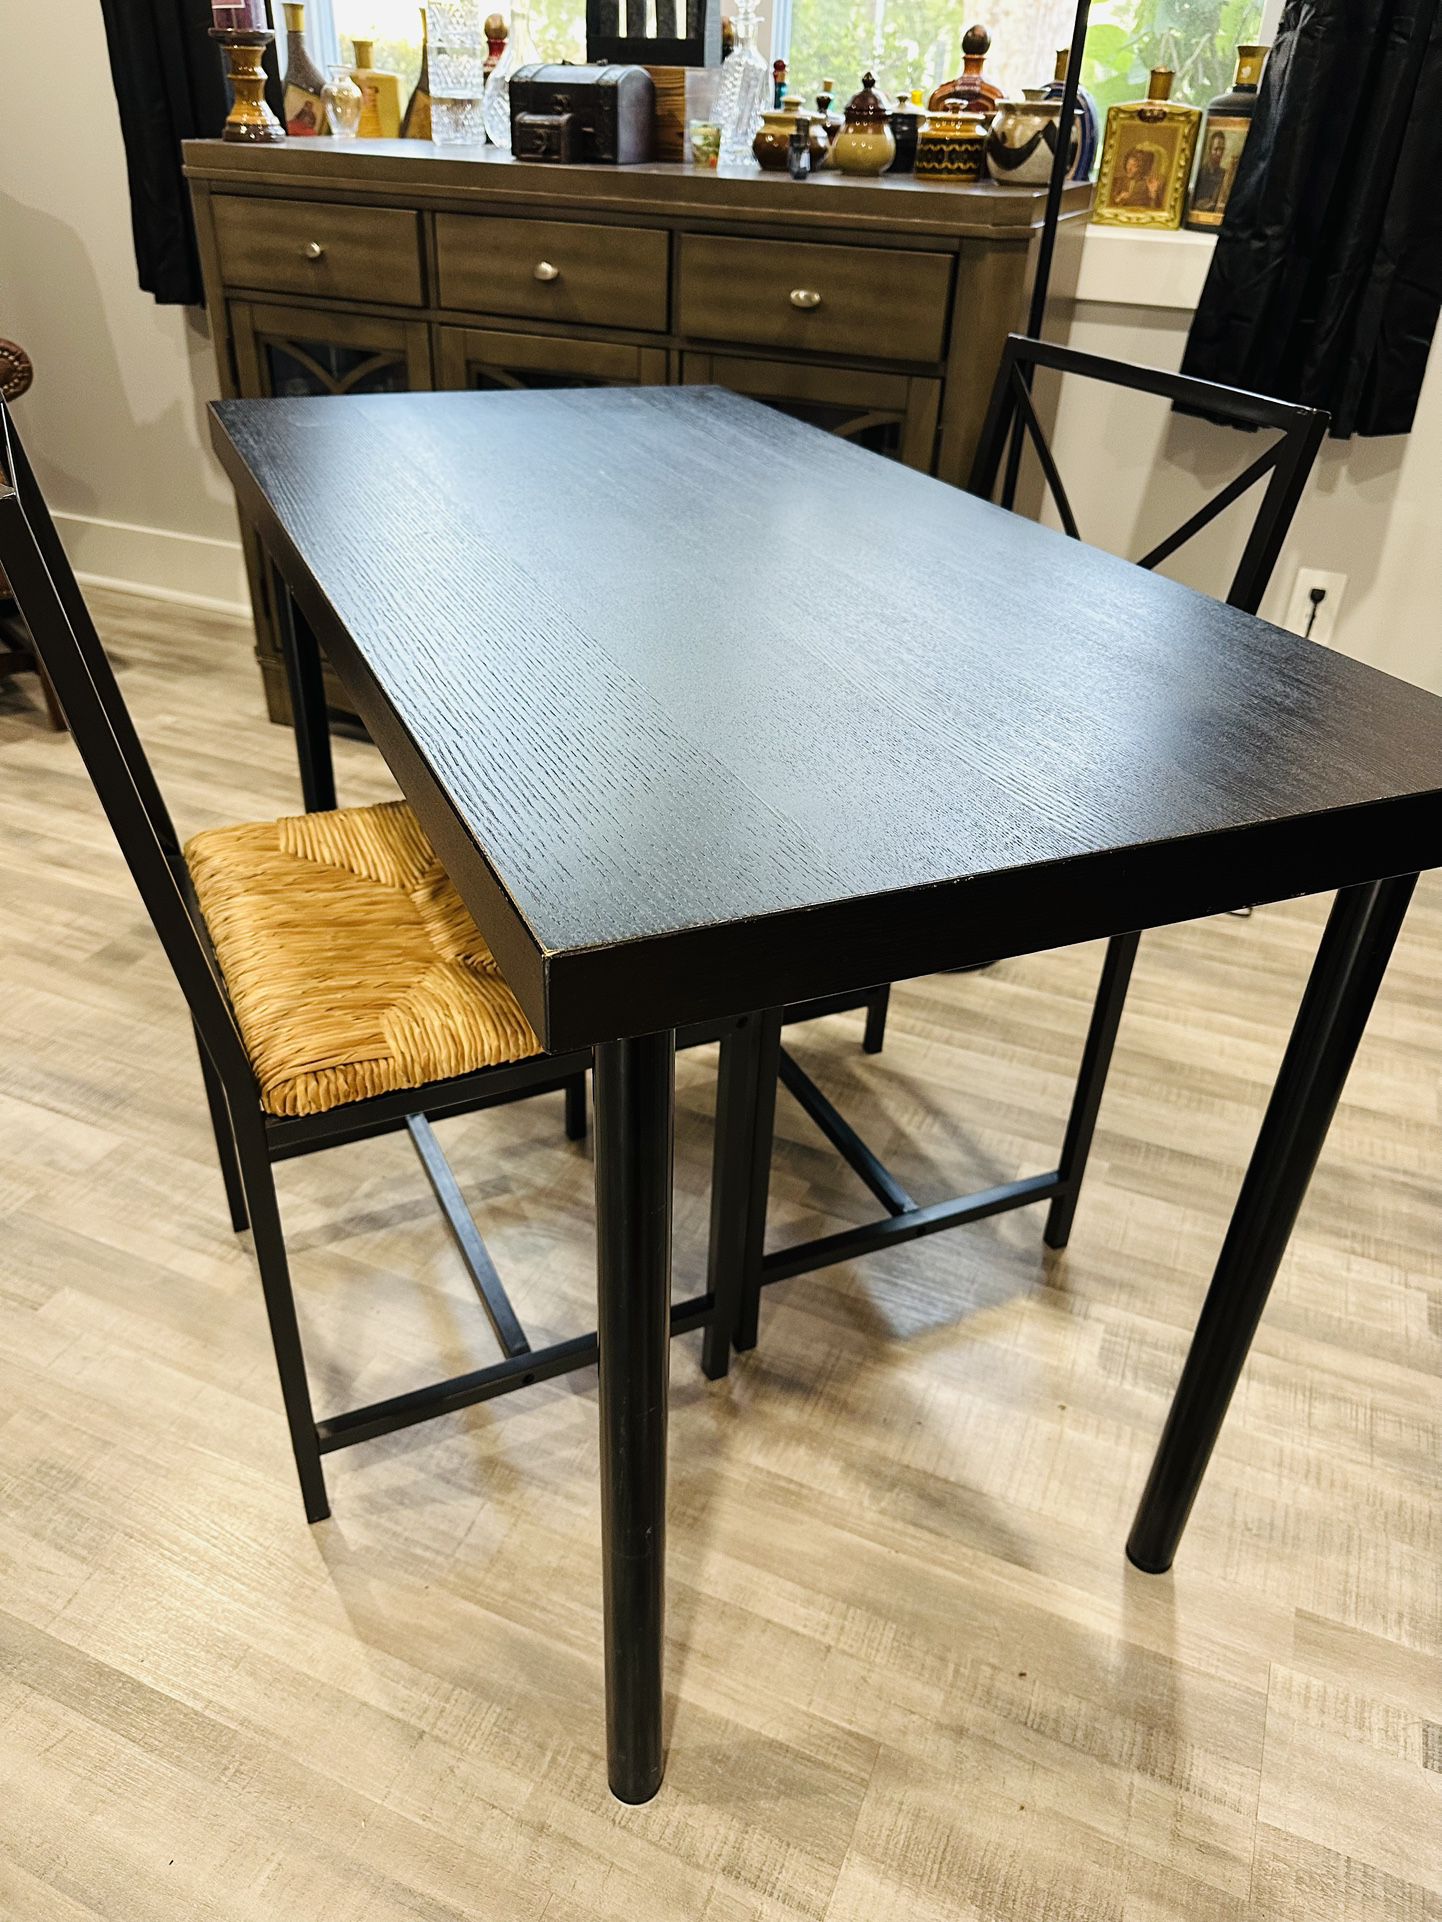 IKEA LINNMON/ADILS Desk/Table And Chairs